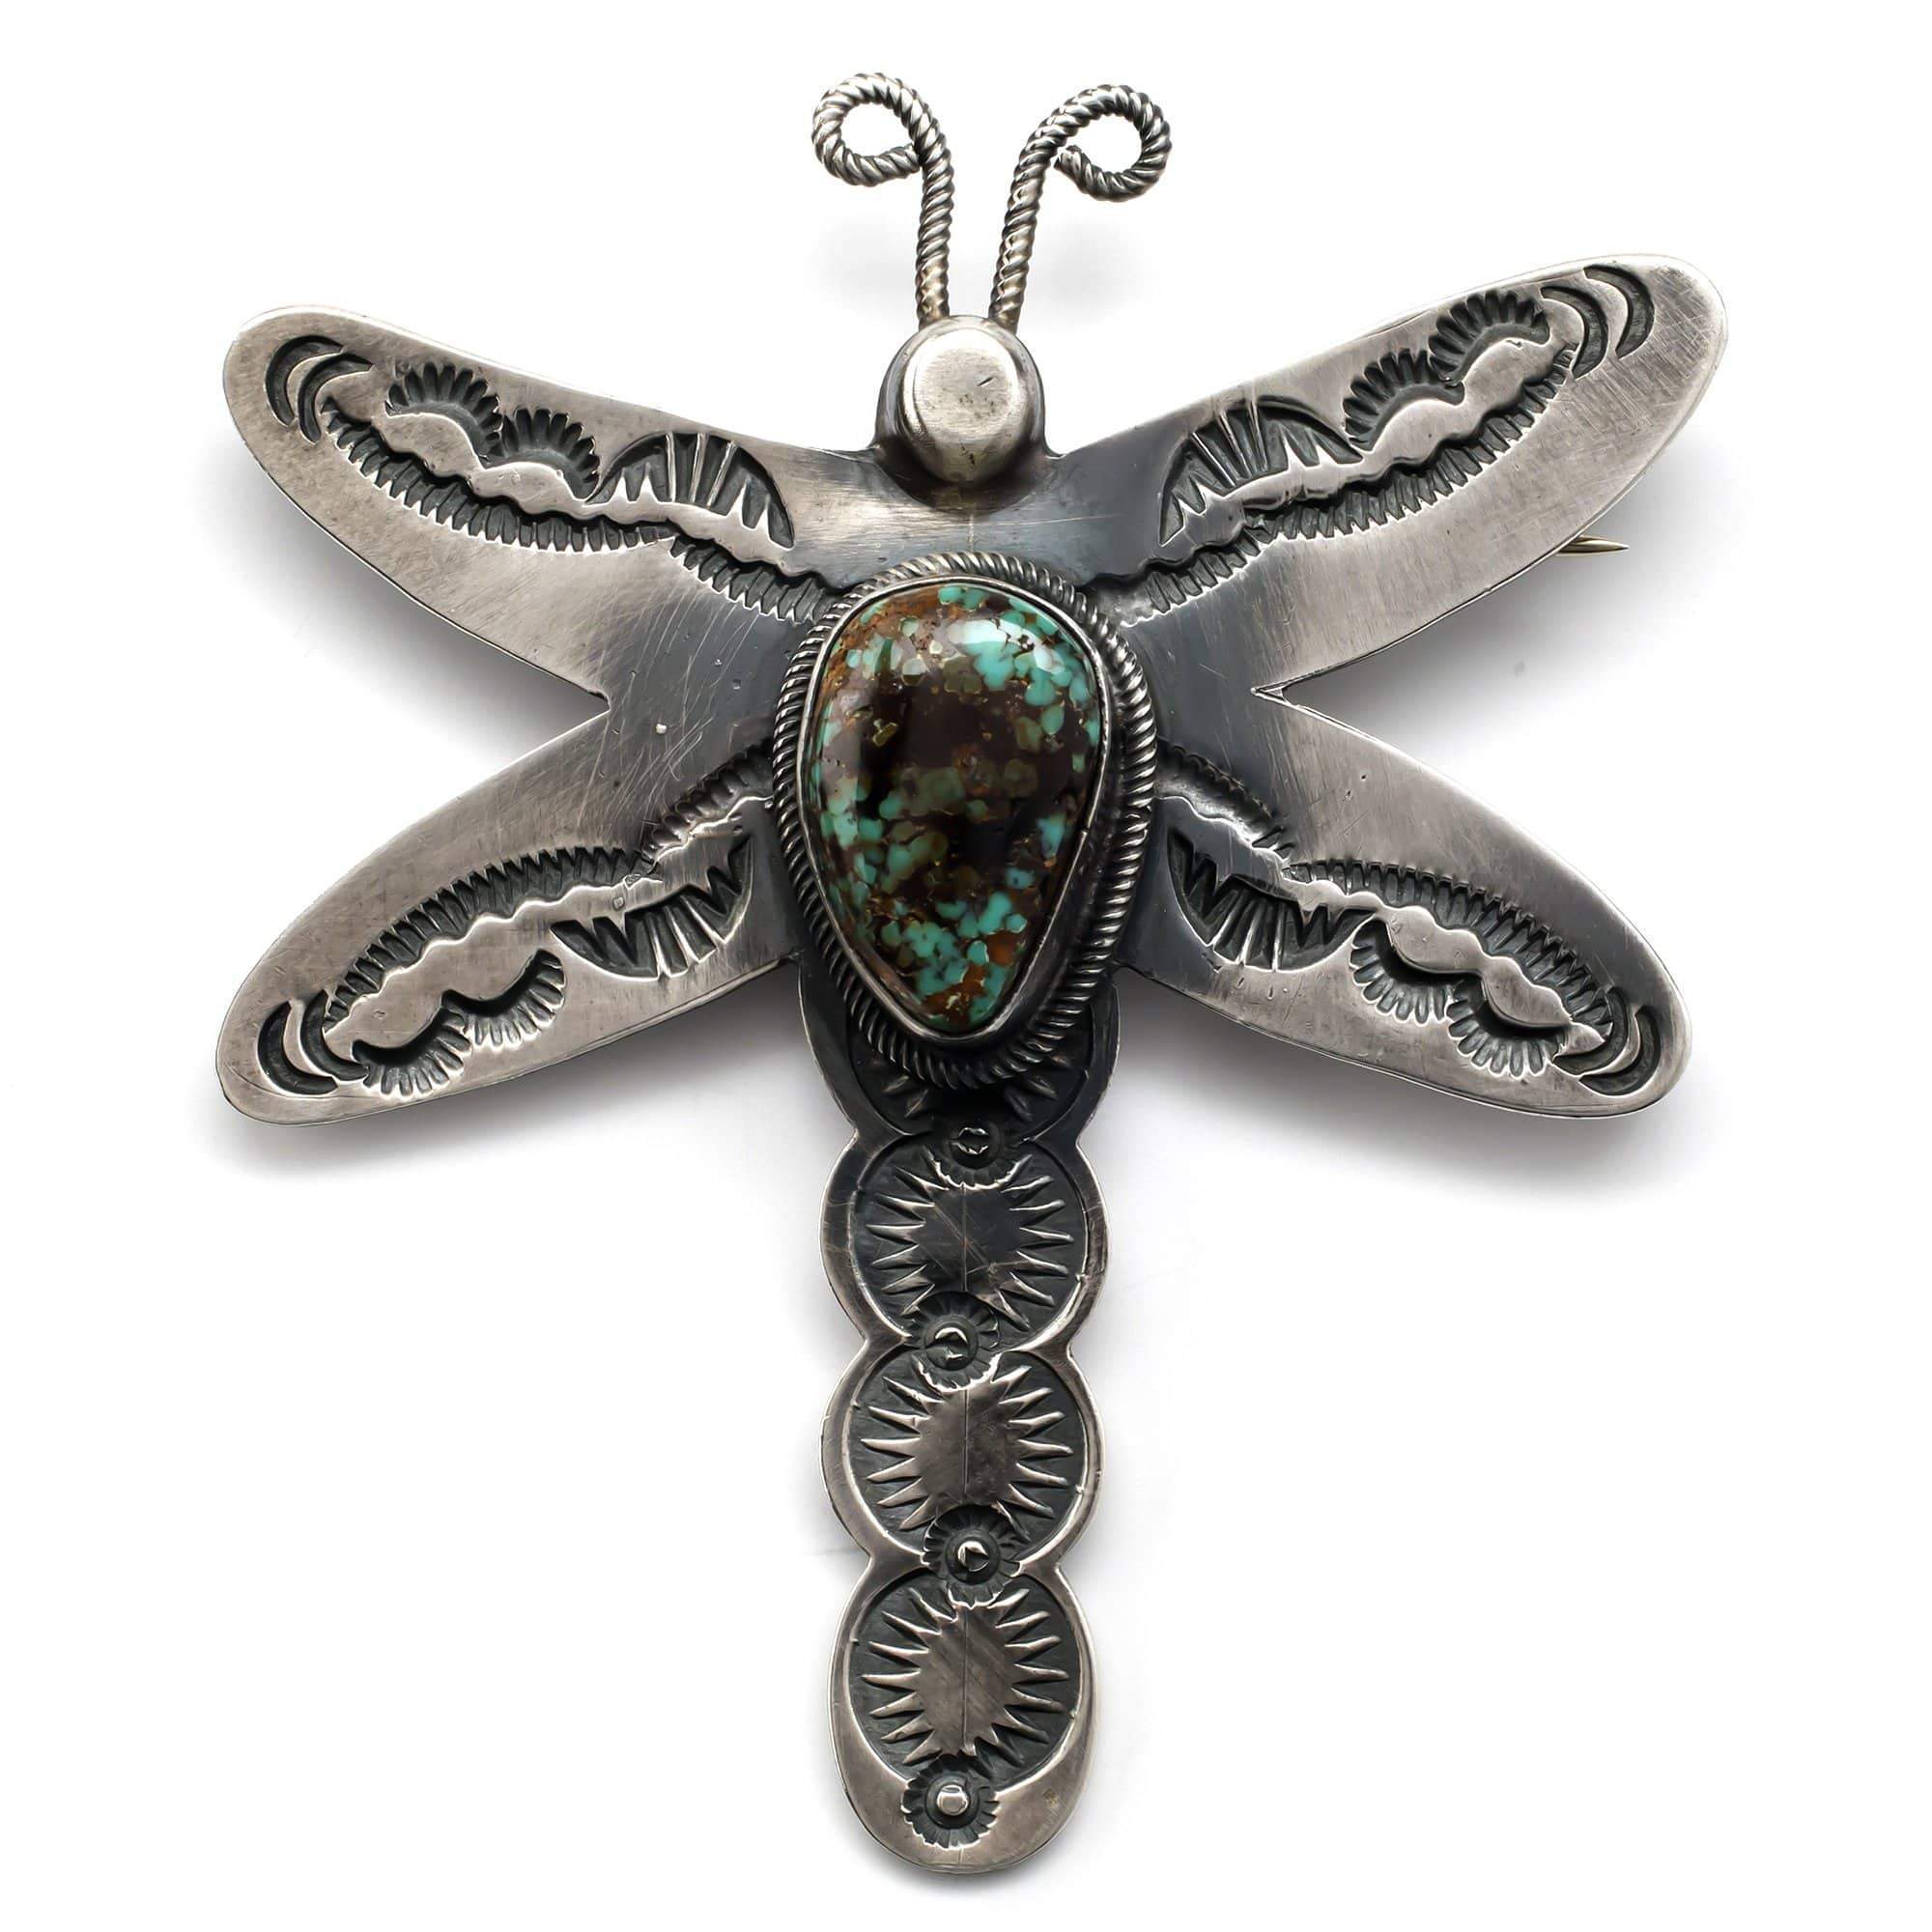 Kalifano Native American Jewelry Kingman Turquoise USA Native American Made 925 Sterling Silver Dragonfly Pin NAP750.002